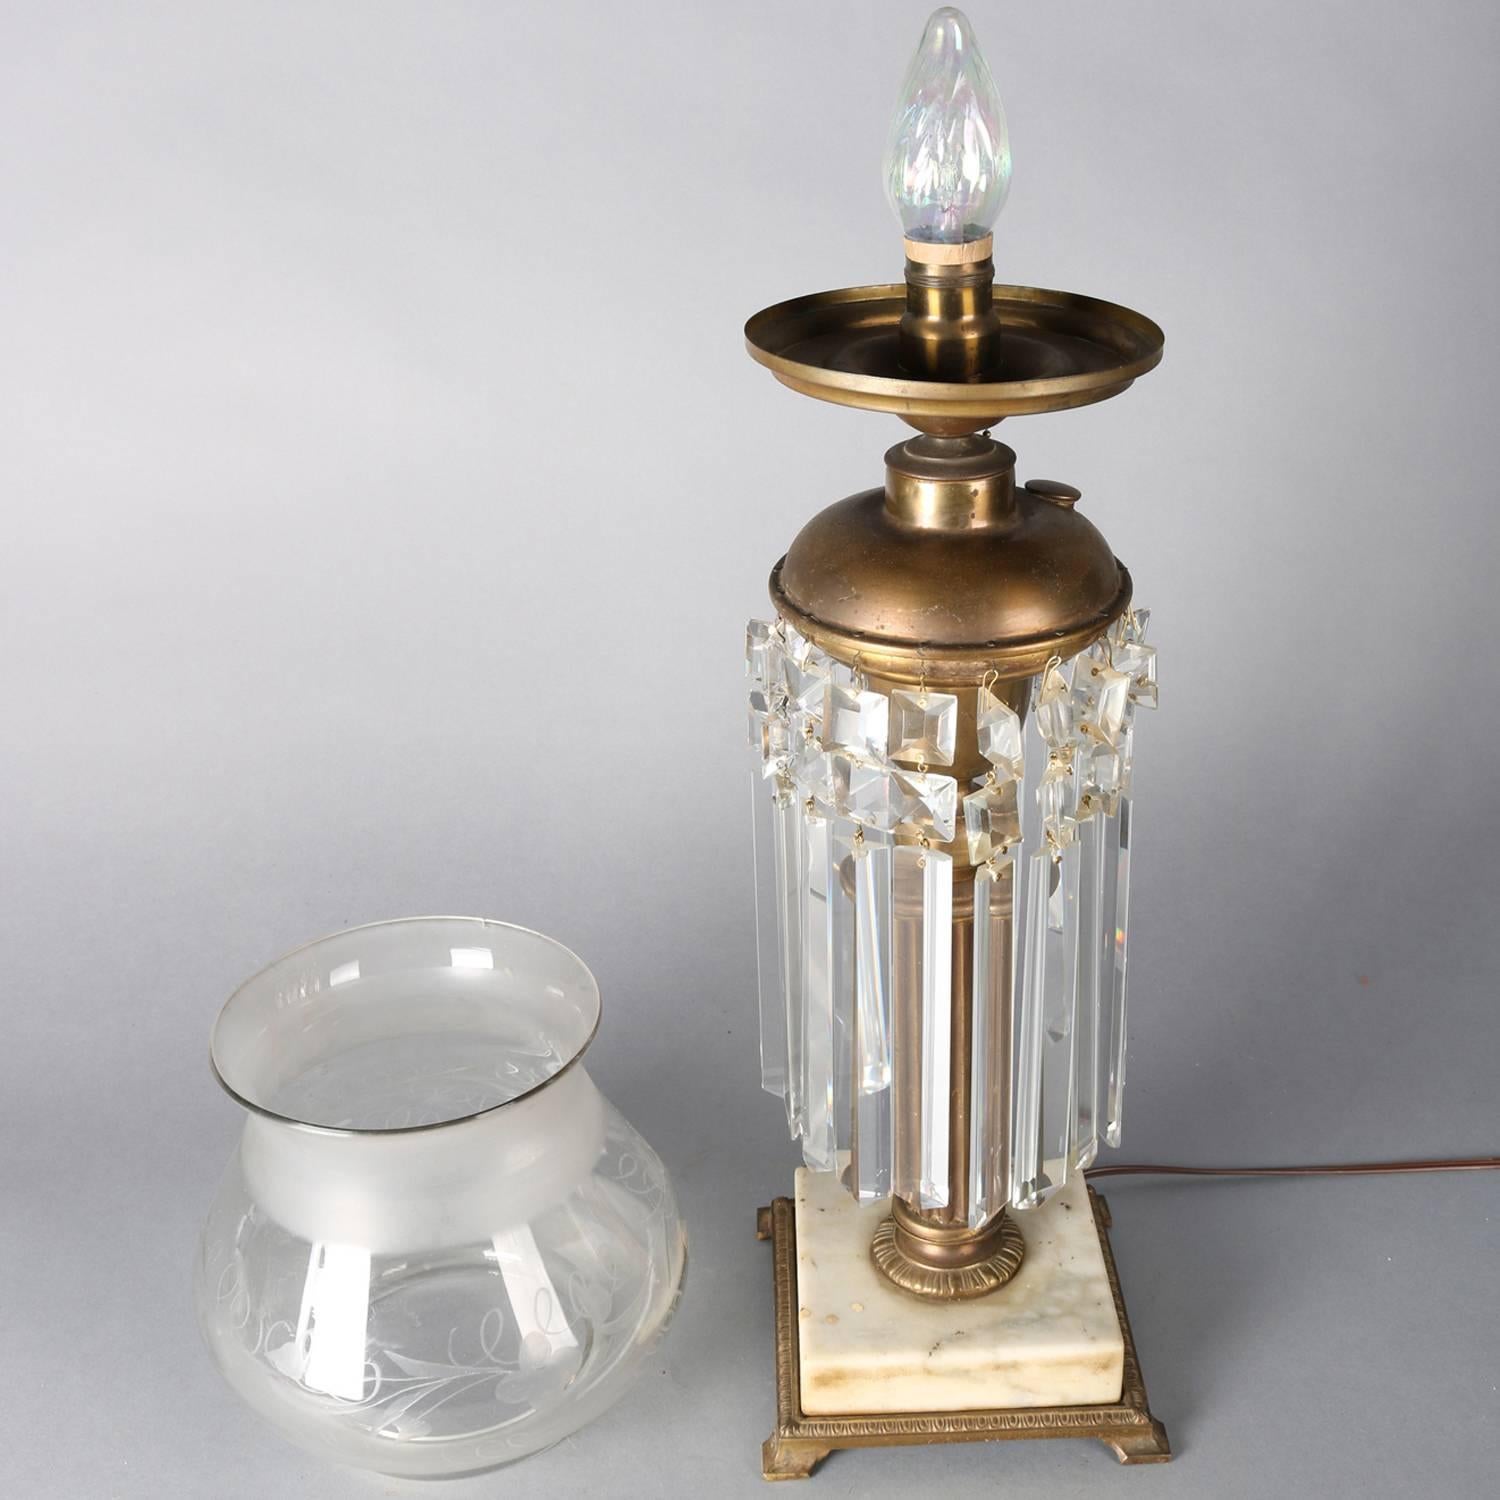 Antique Gilt, Marble and Crystal Electrified Solar Lamp, 19th Century 4